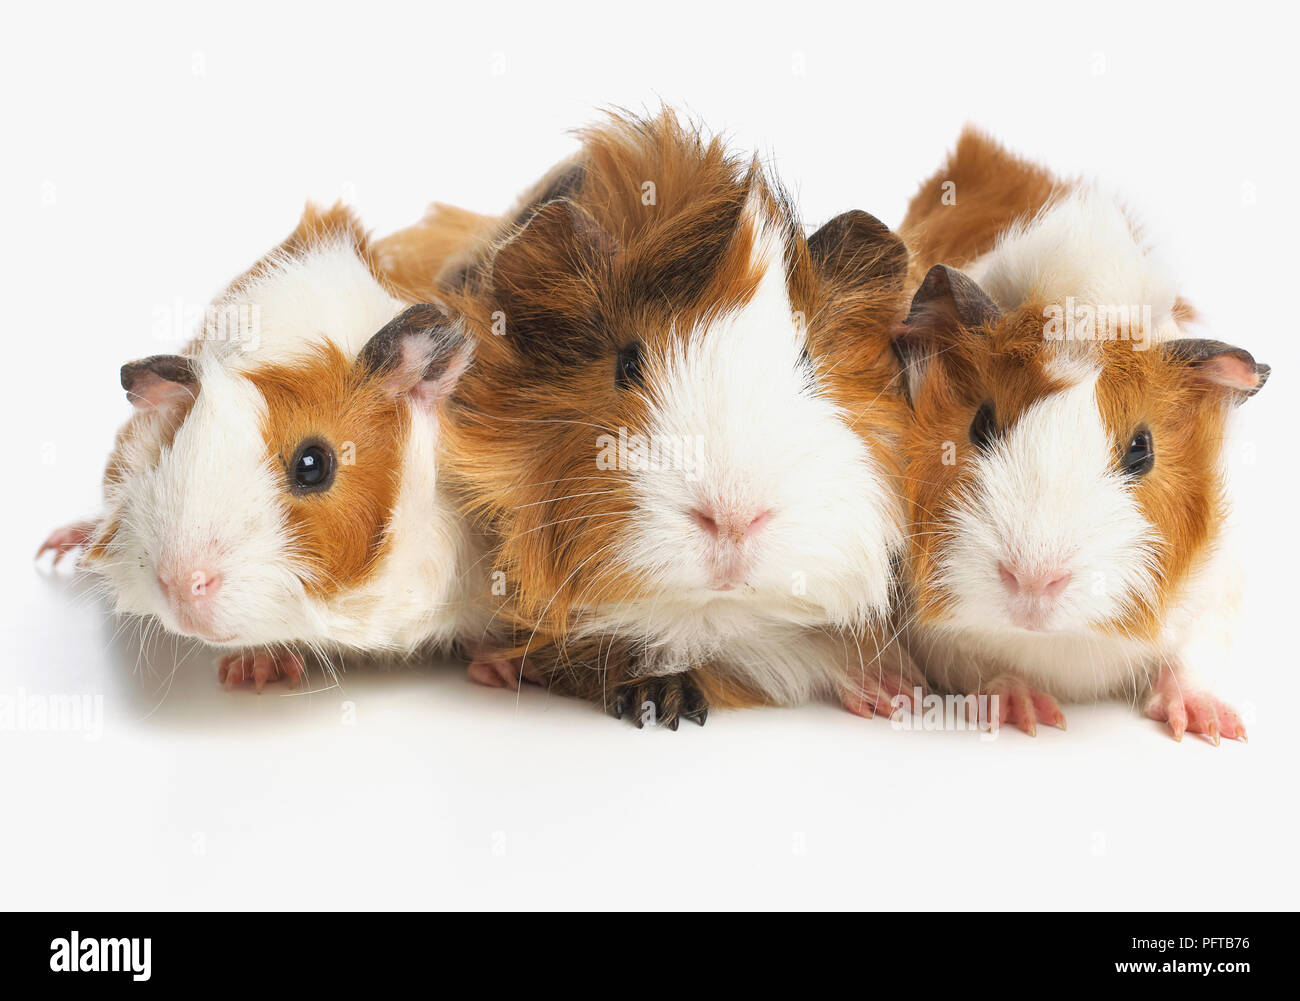 Guinea pigs, Abyssinian guinea pigs, young Abyssinian guinea pigs Stock Photo